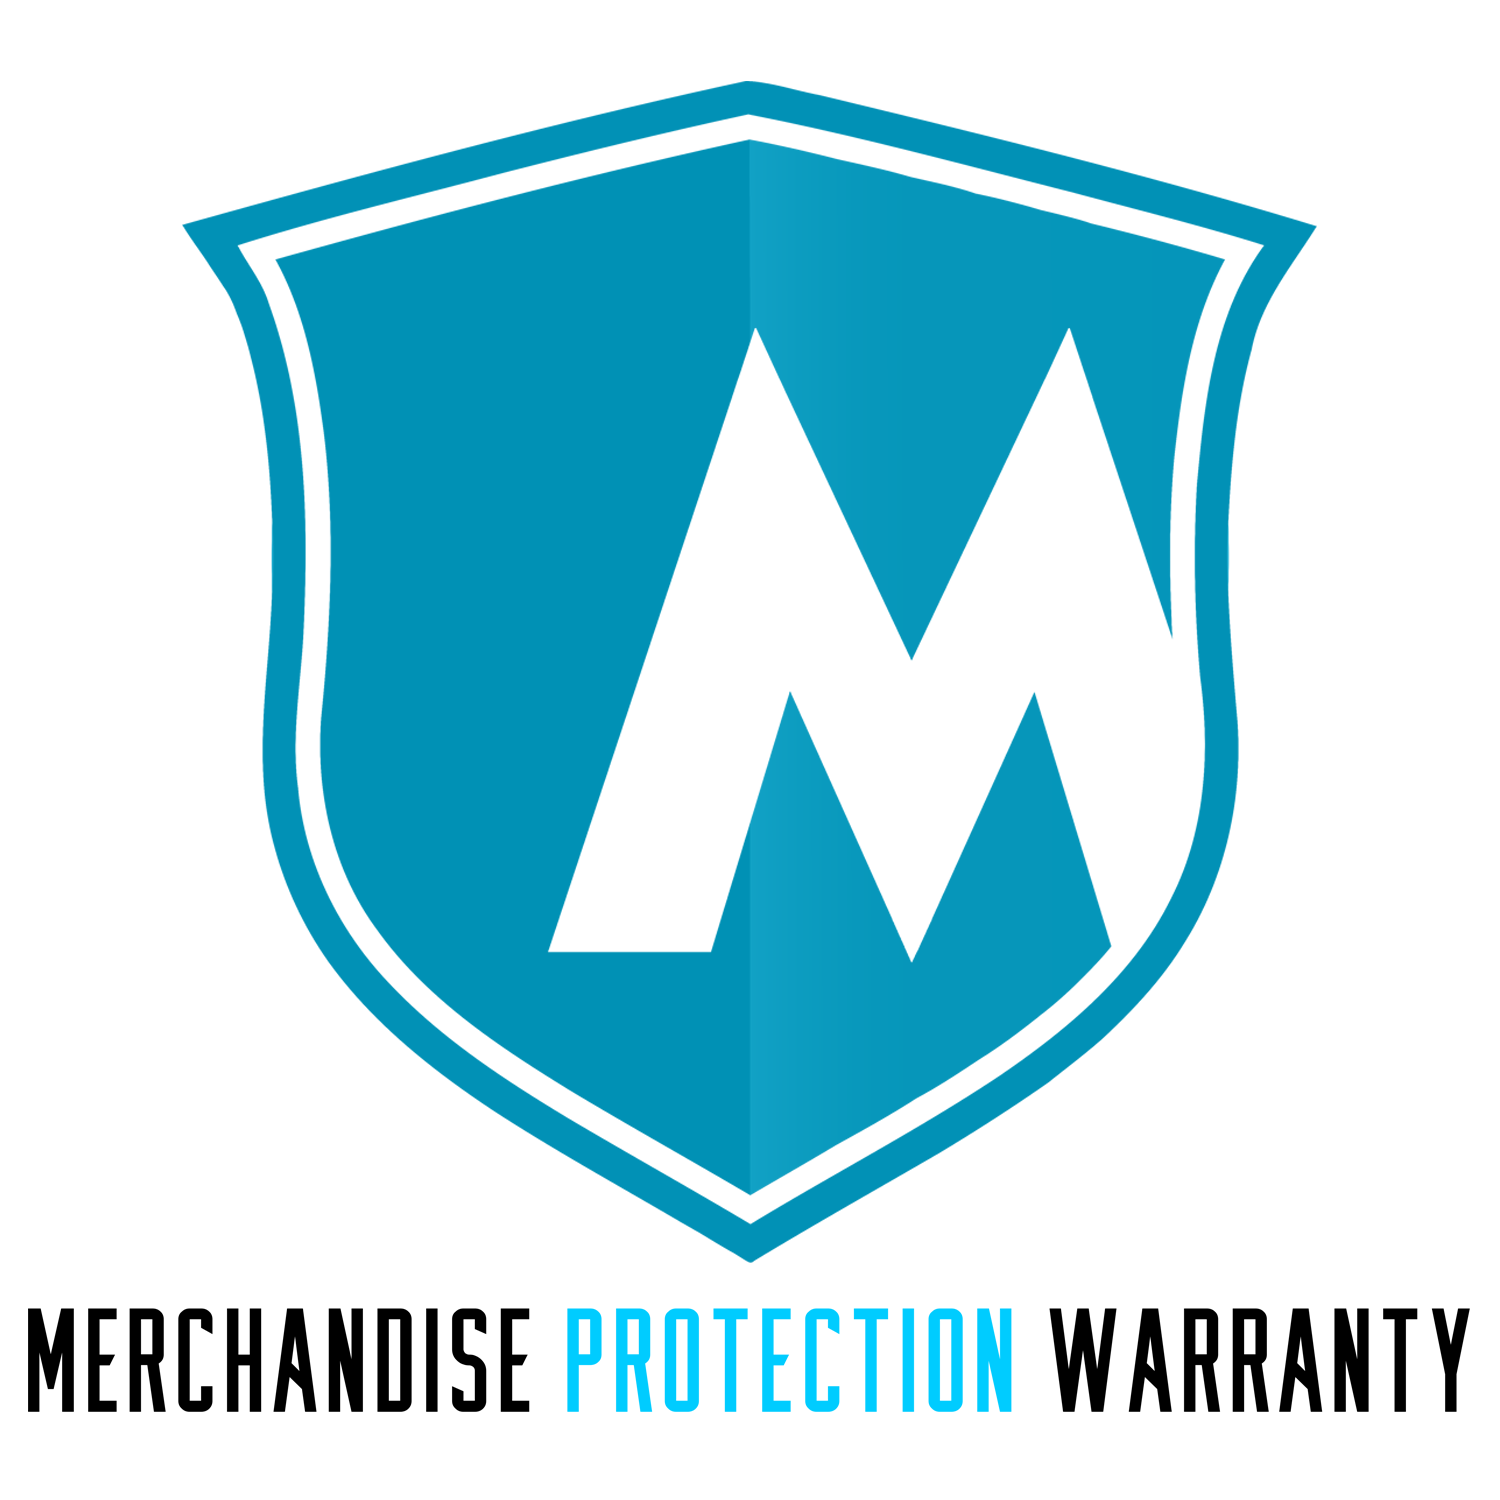 2 Year Merchandise Protection Warranty under $750 (Accidental, Prepaid Shipping)